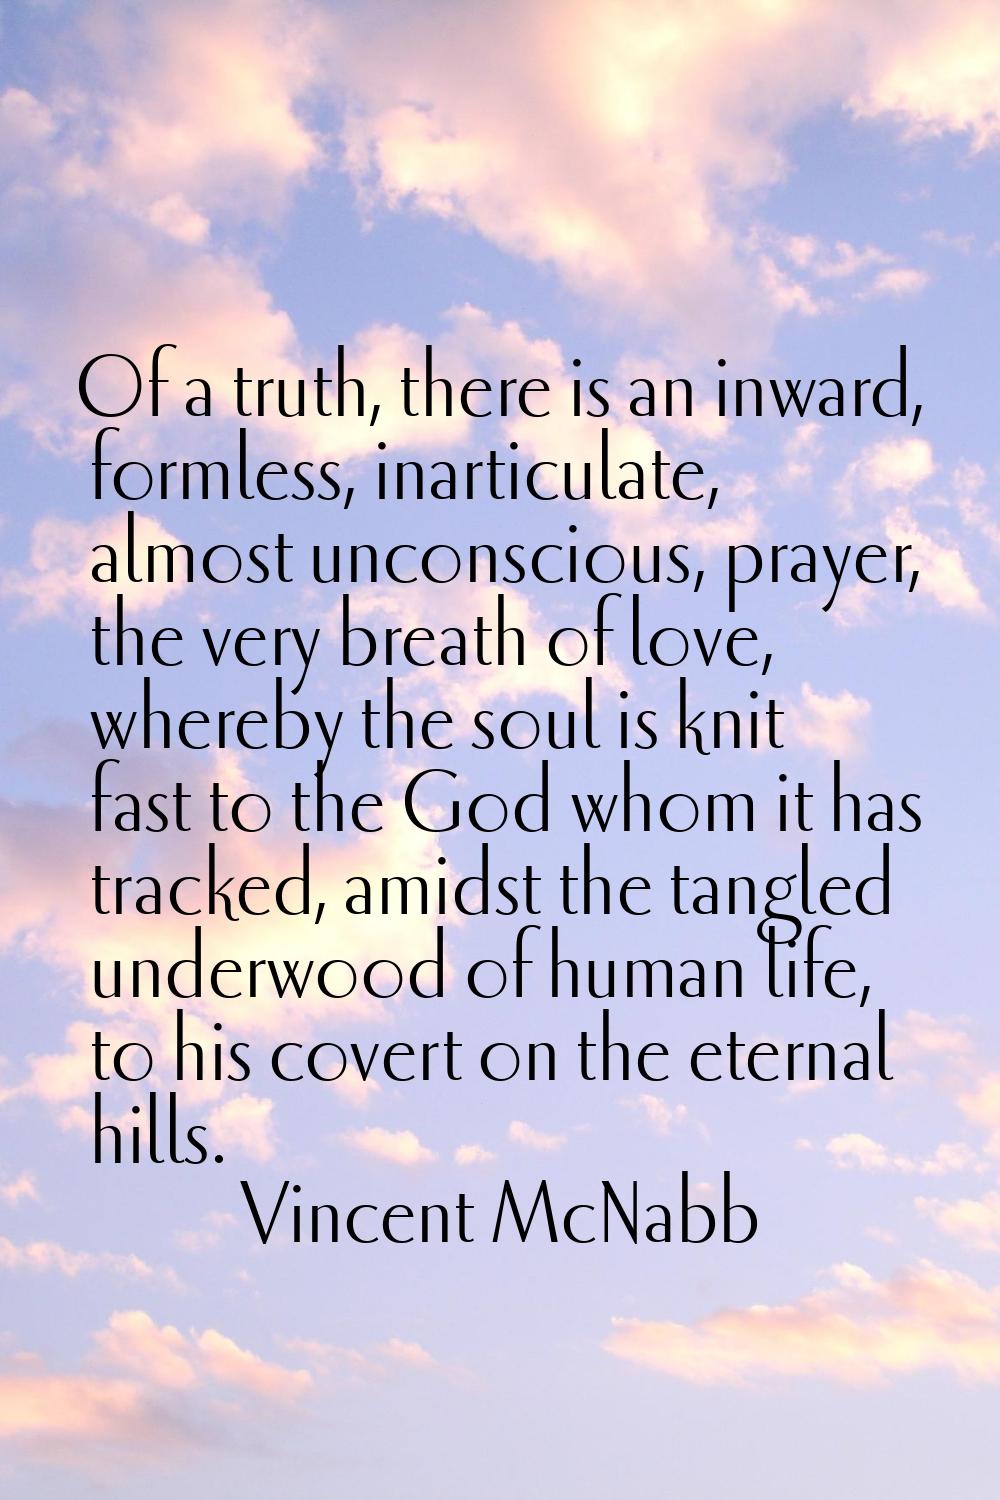 Of a truth, there is an inward, formless, inarticulate, almost unconscious, prayer, the very breath